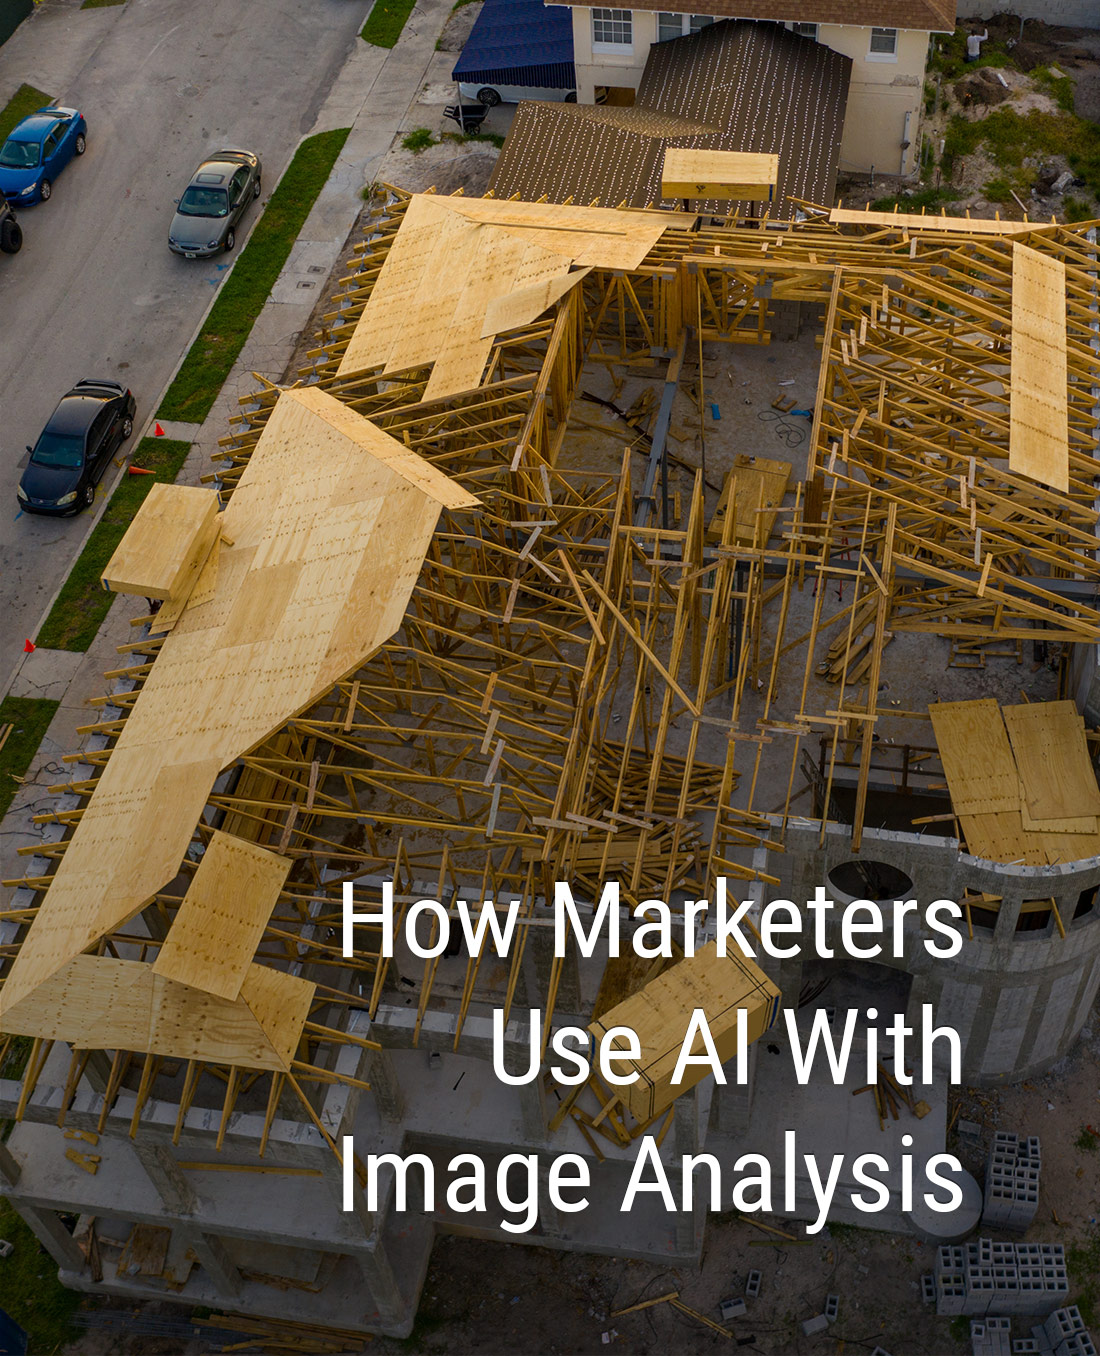 How Marketers Use AI With Image Analysis